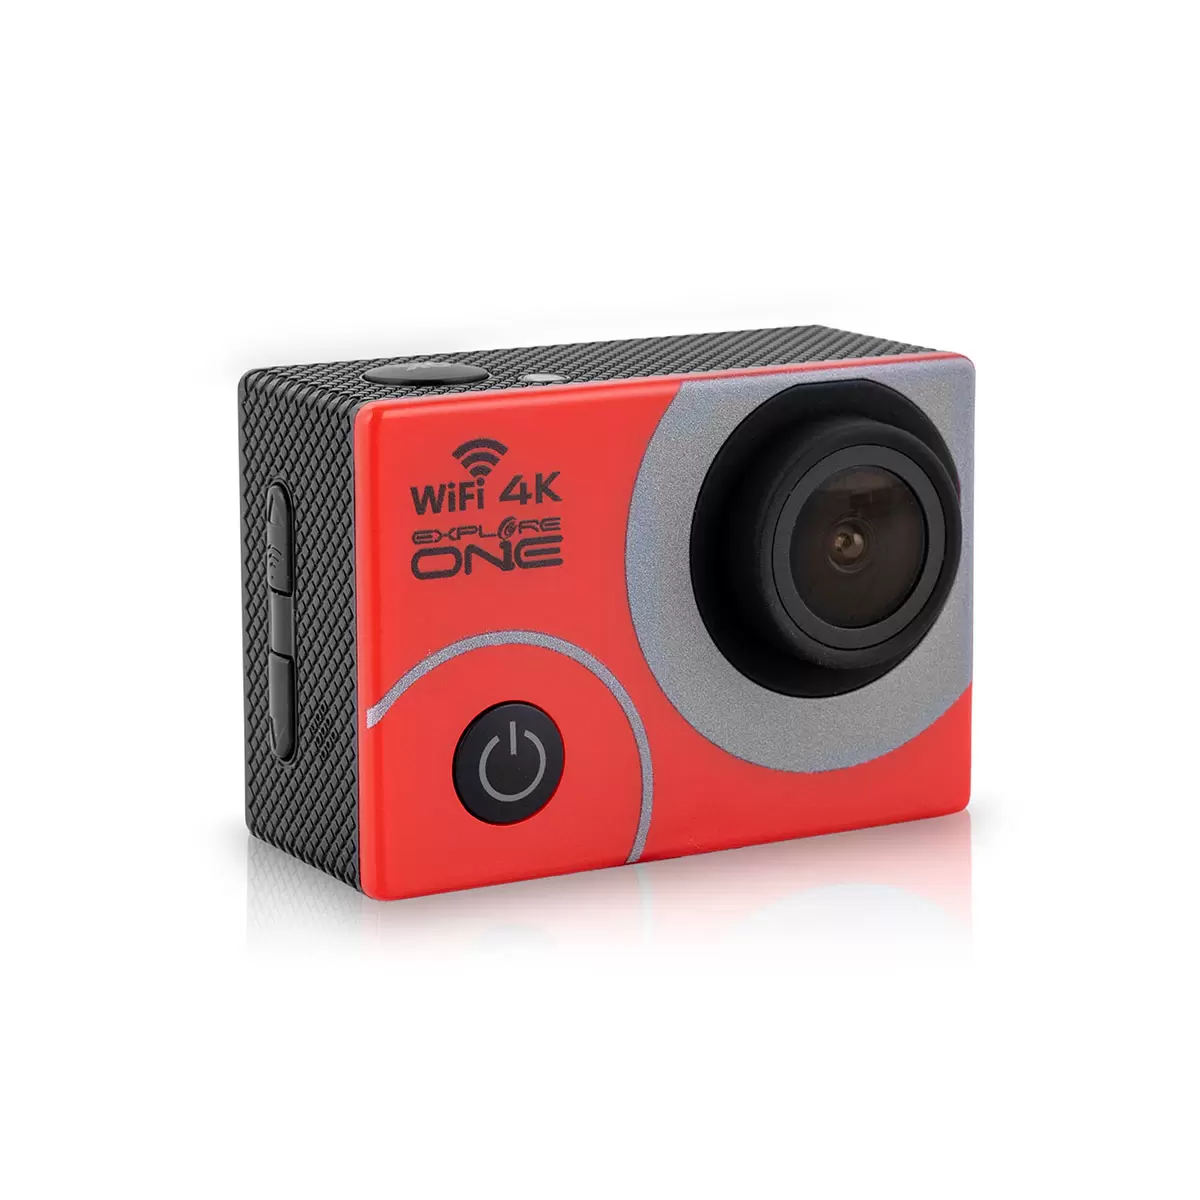 Buy Explore One 4K Action Camera Set Feature5 Image at Costco.co.uk